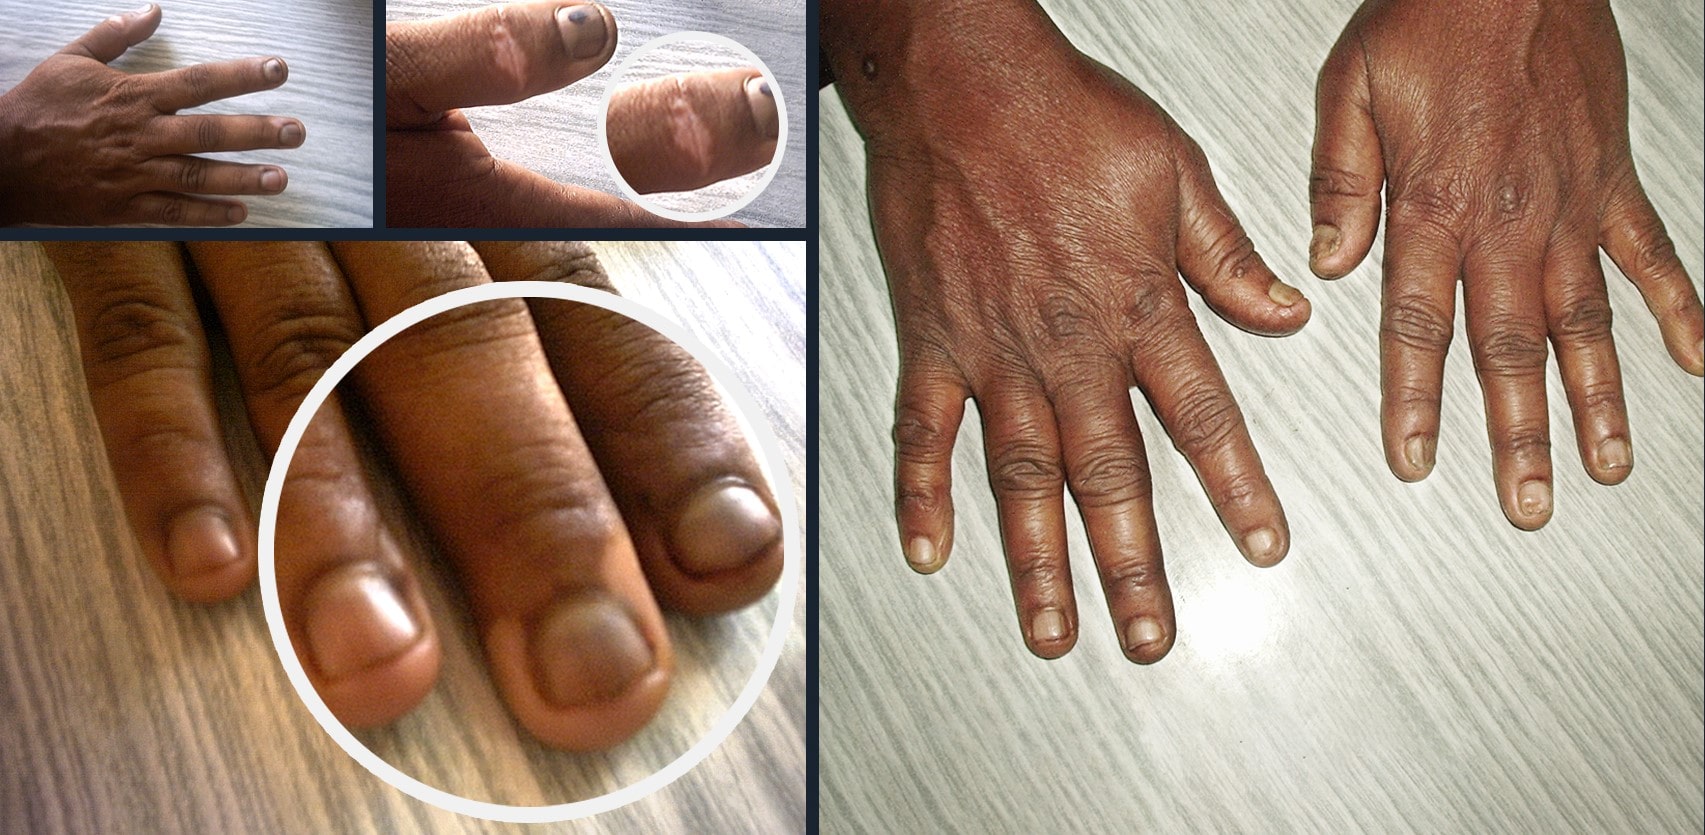 Patient suffering from Vitiligo treated by drcheena homeopathy achieved complete cure